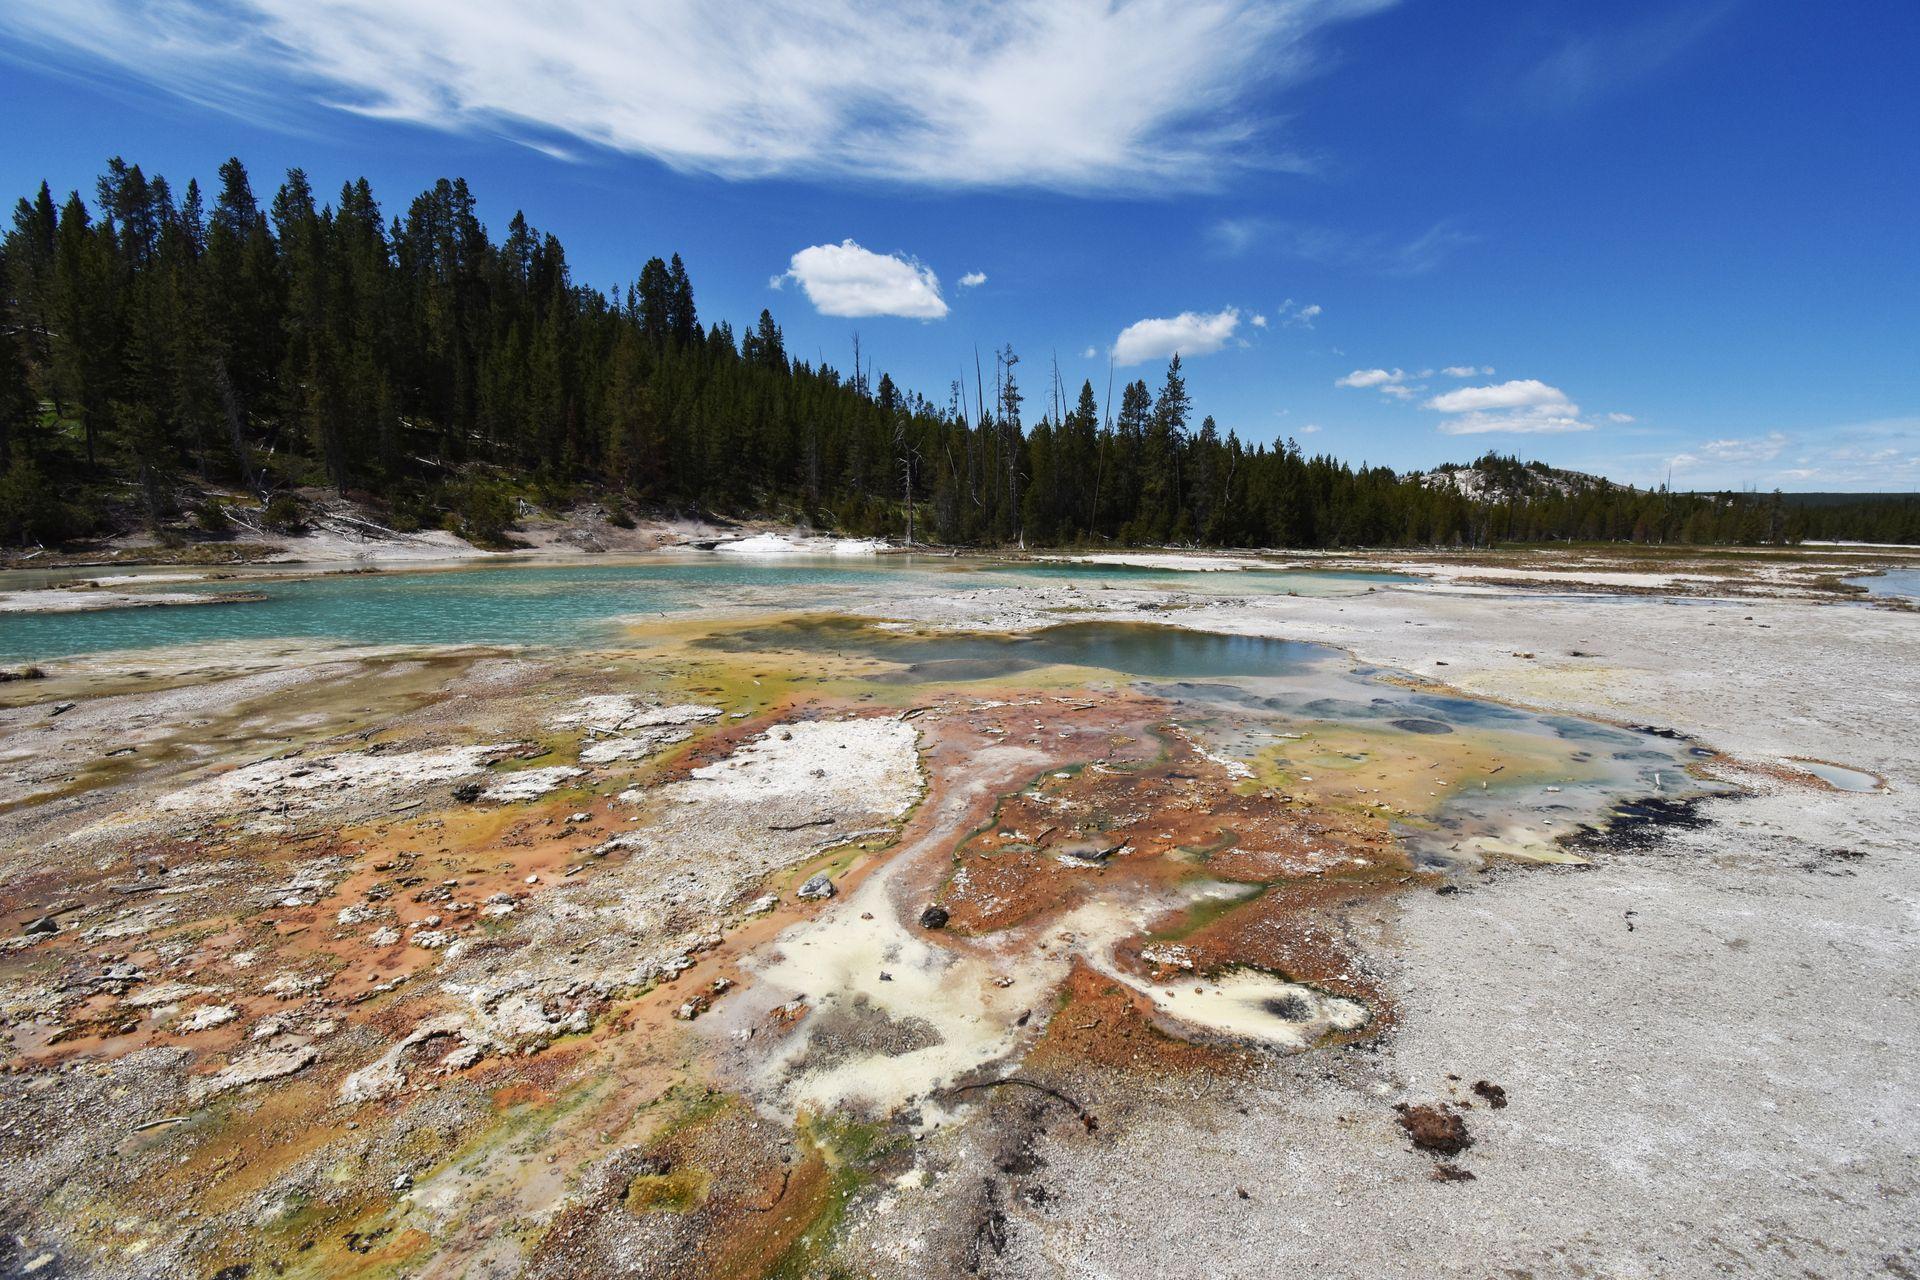 A hot spring with yellow and orange colors and blue water at the Norris Geyser Basin.